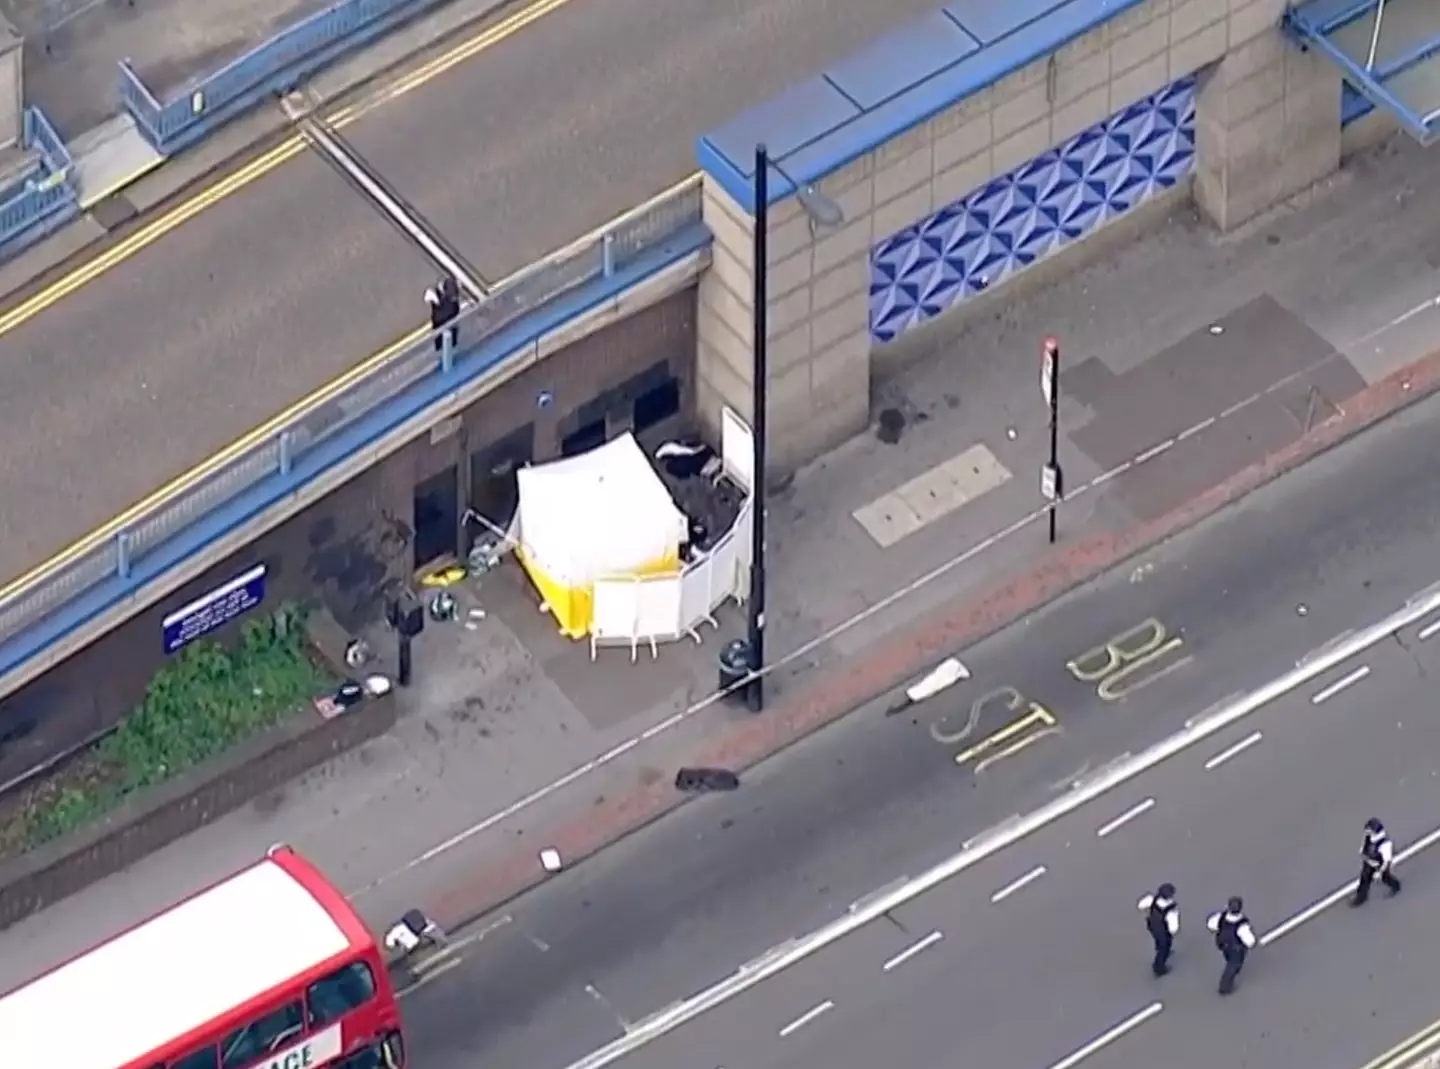 A 15-year-old was stabbed to death on a bus in London.